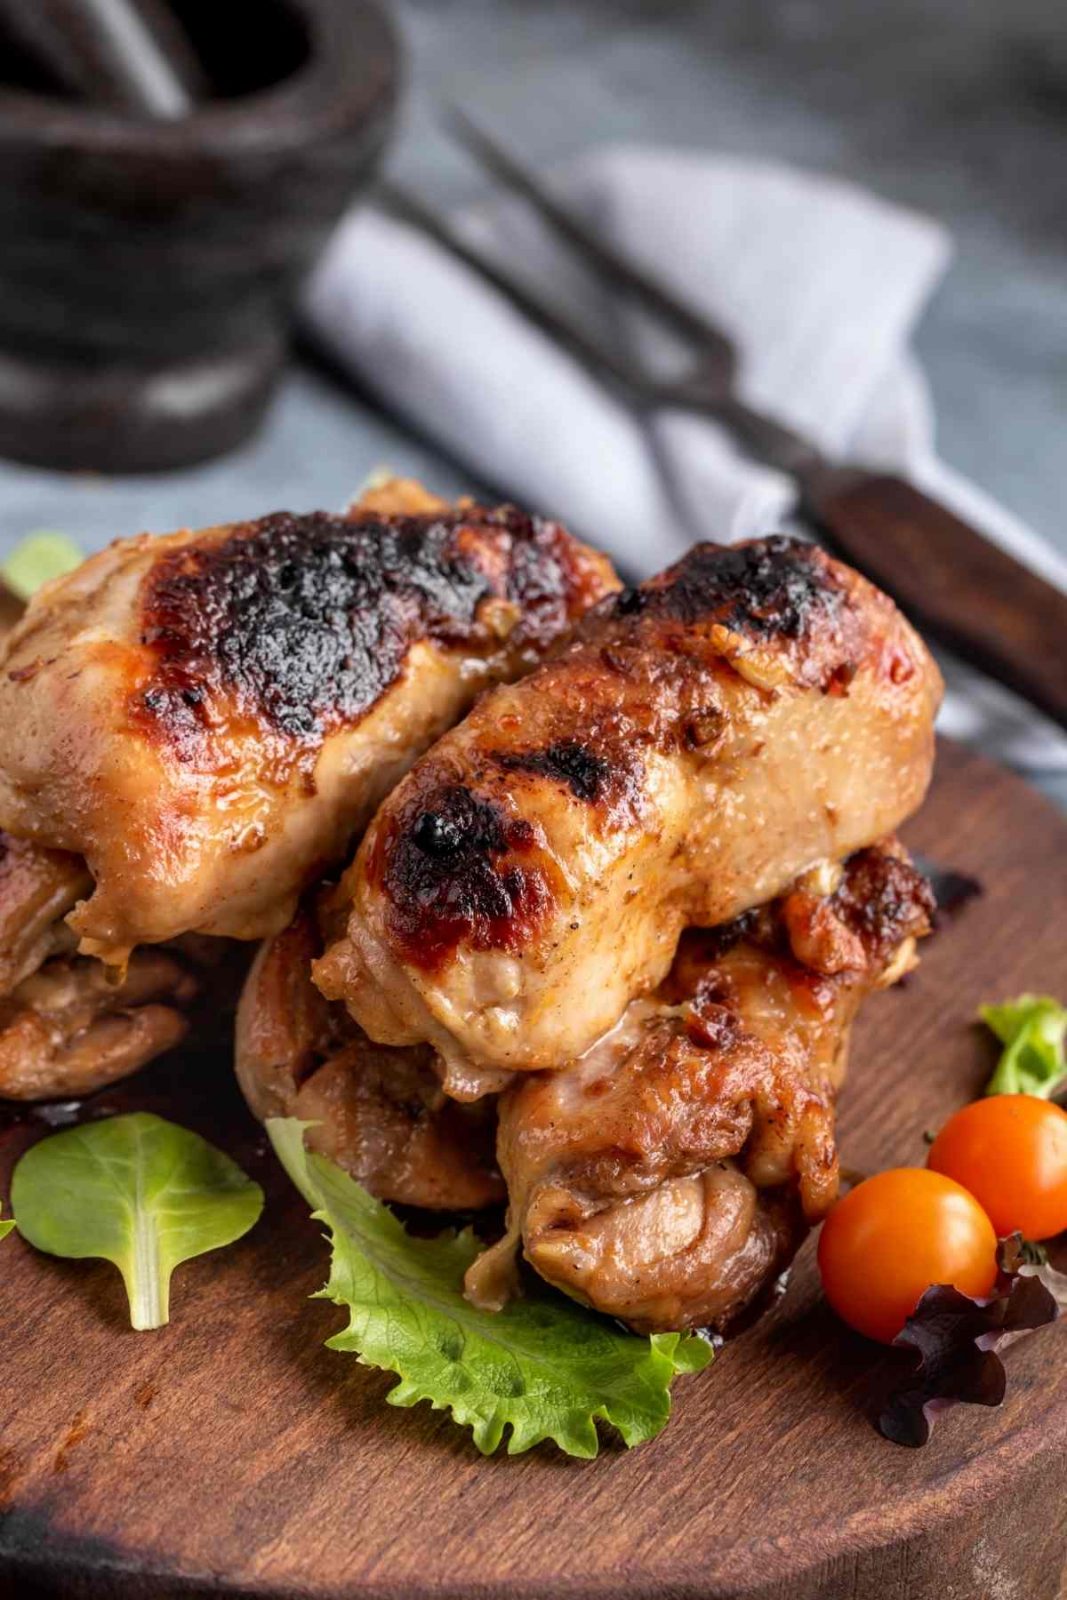 Boneless chicken thighs are tender, juicy when properly cooked. If you’d like to bake them at high temperature like 400 F degrees, the trick is to know how long to bake boneless chicken thighs to achieve juicy results every time!